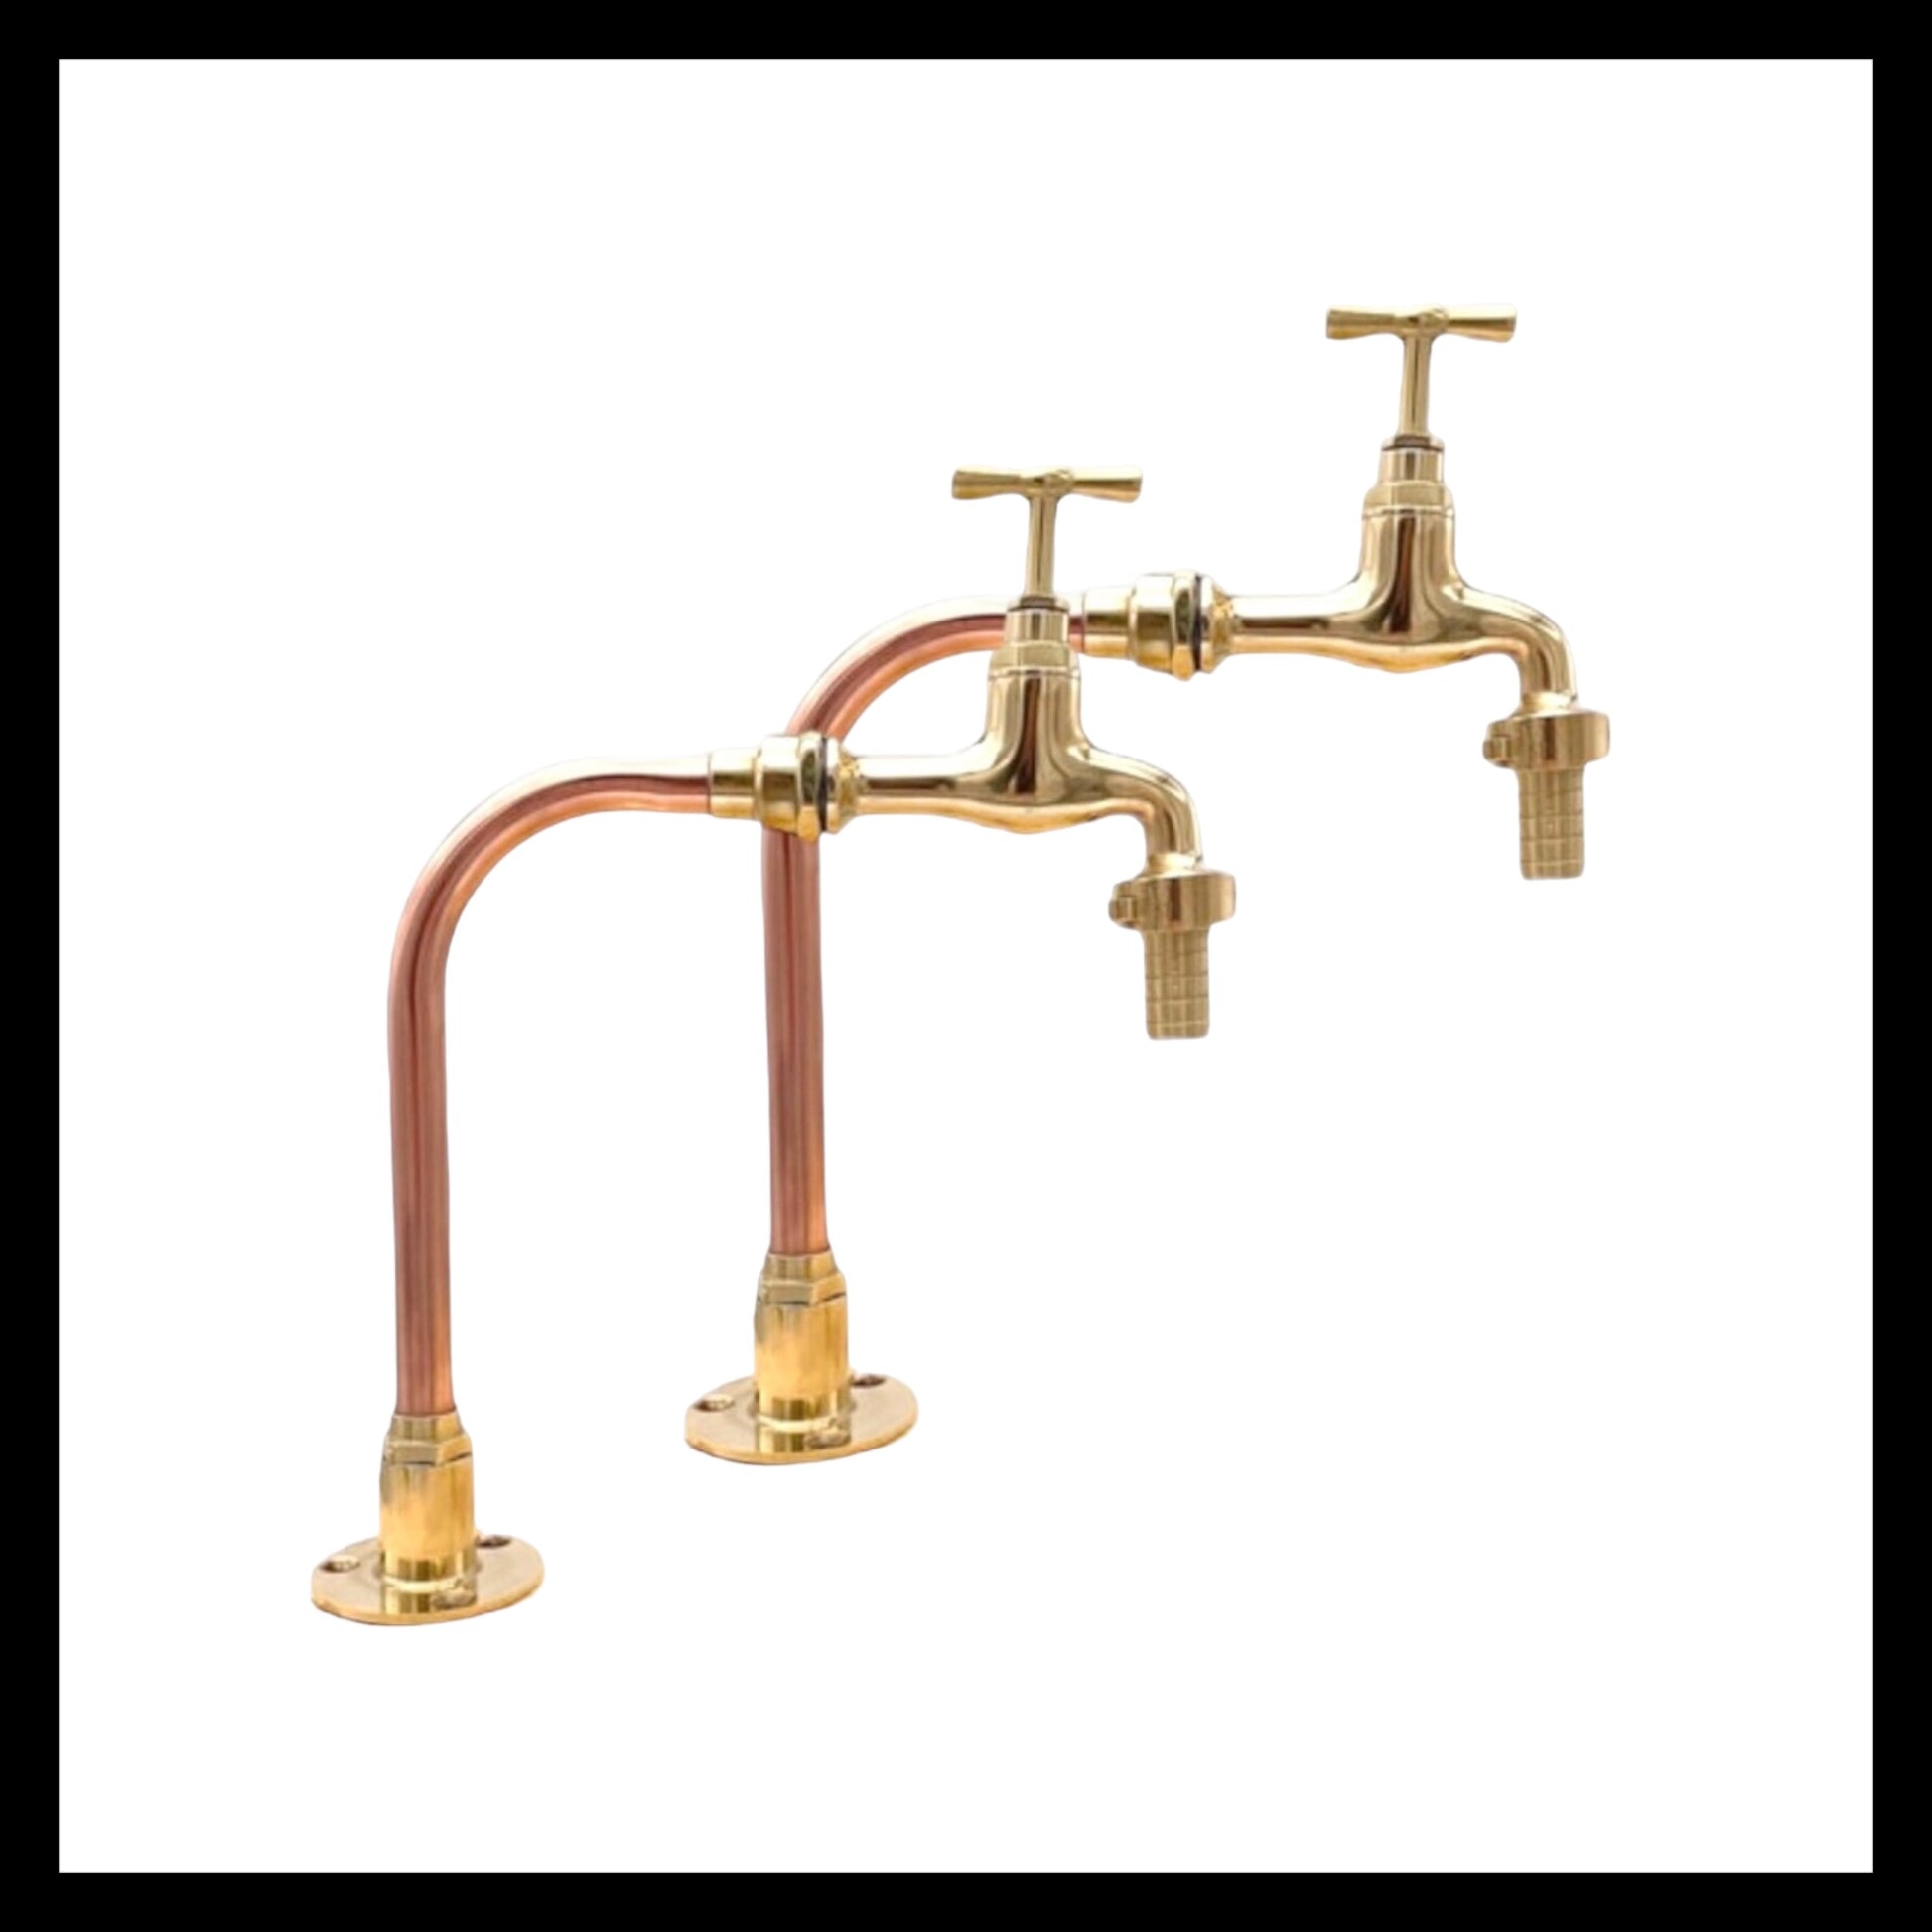 image pair of handmade copper and brass swan neck taps with detachable nozzle sold by Copper basins and Taps